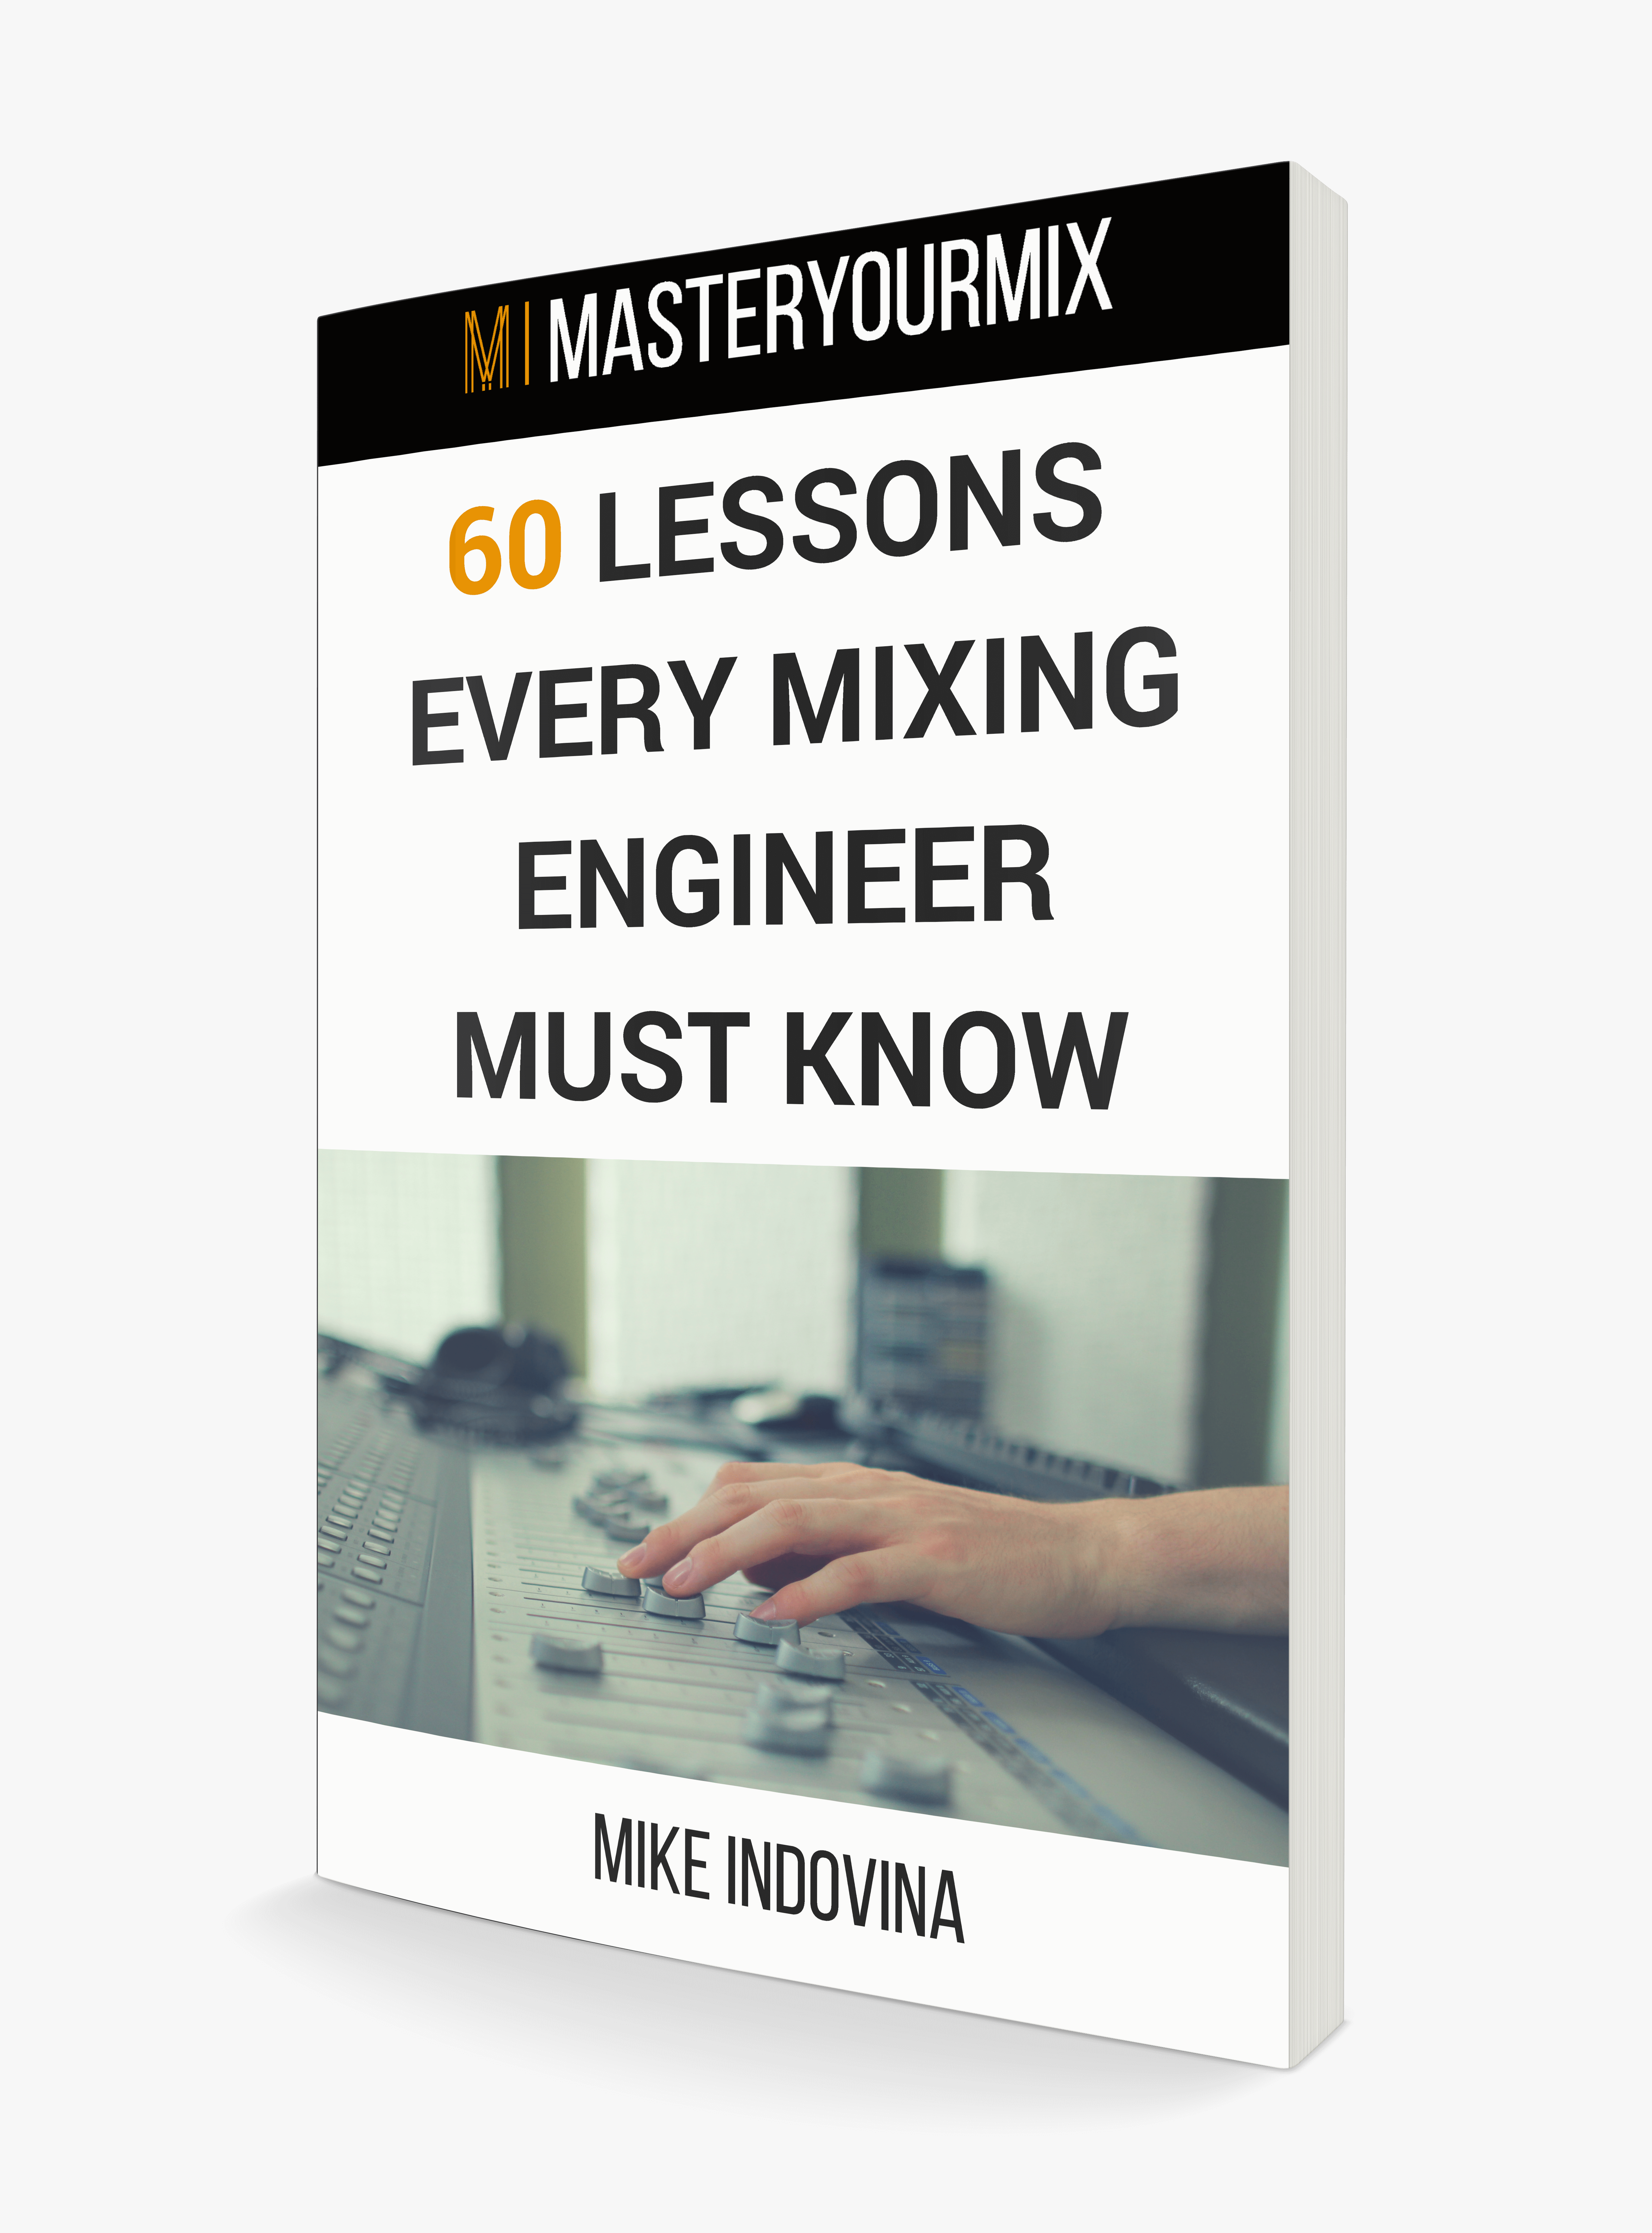 60 Lessons Every Mixing Engineer Must Know